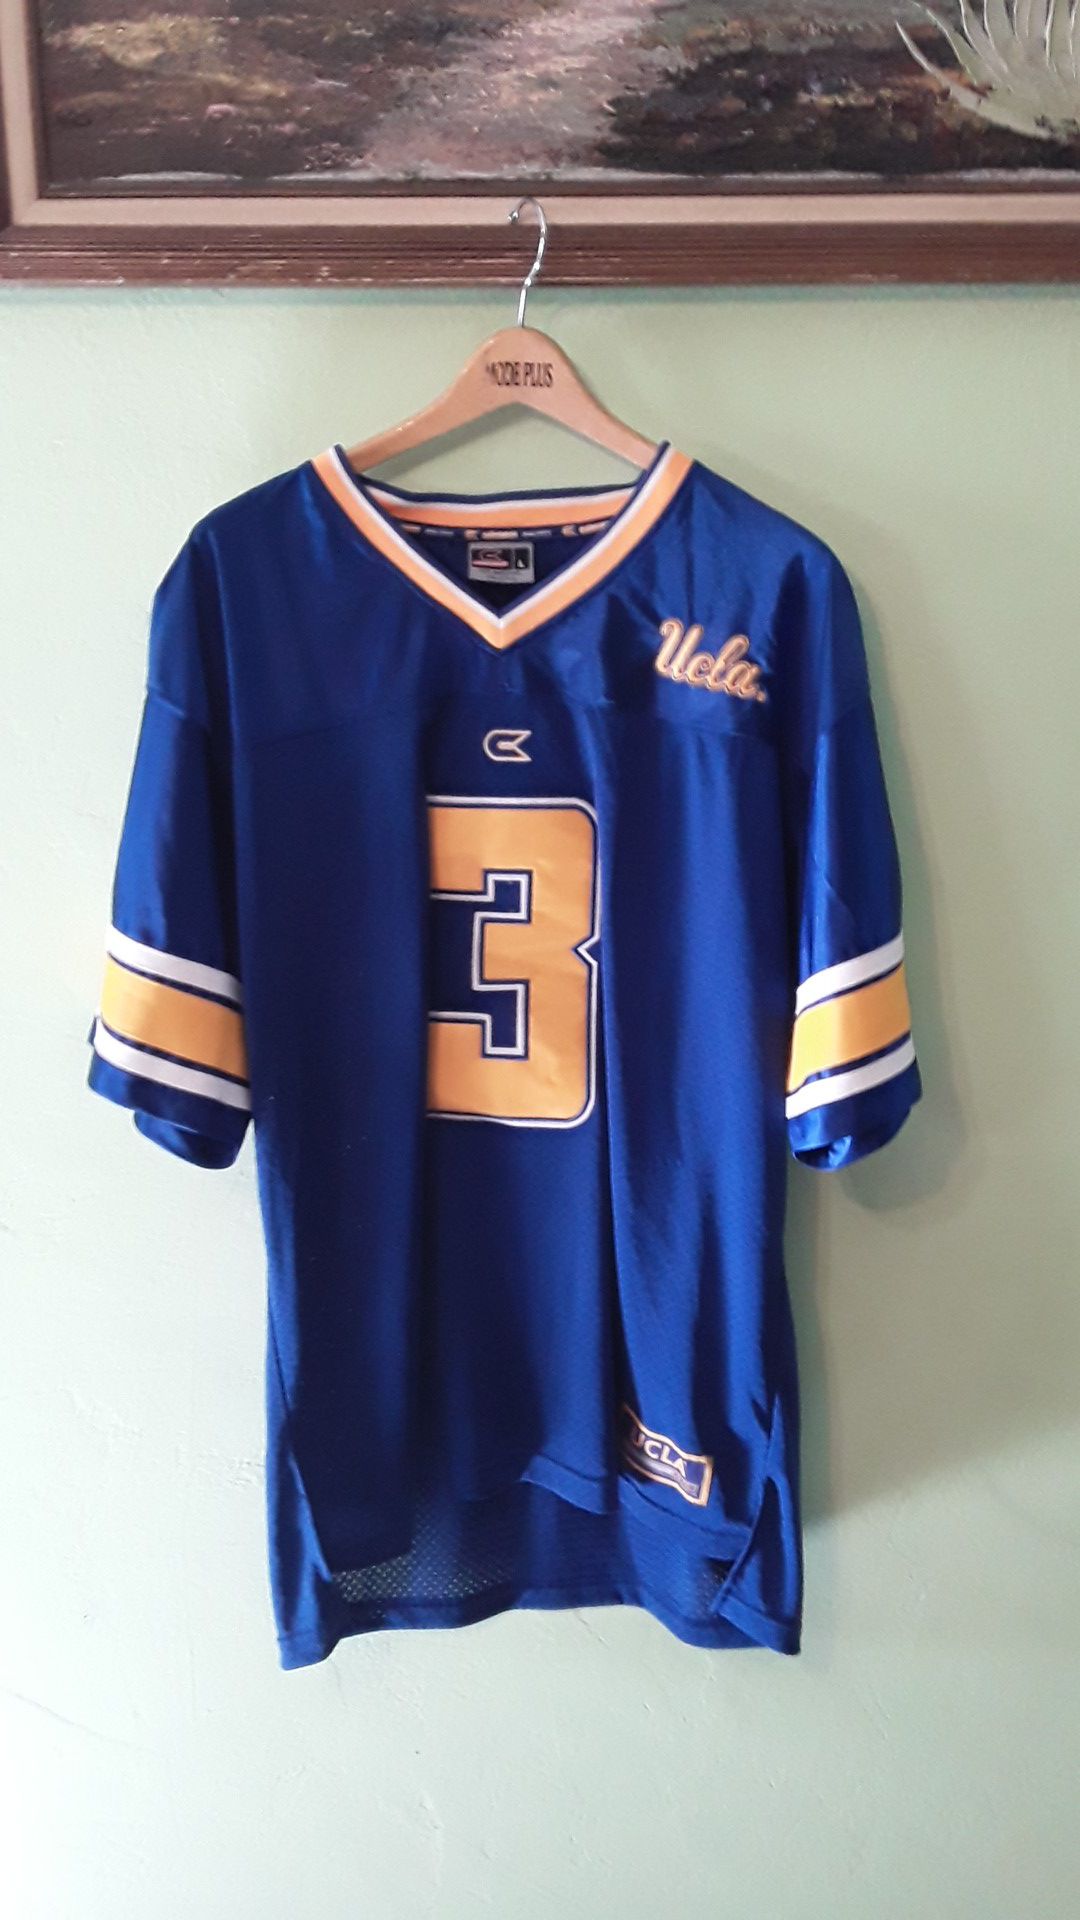 UCLA Bruins Football Jersey for Sale in Long Beach, CA - OfferUp